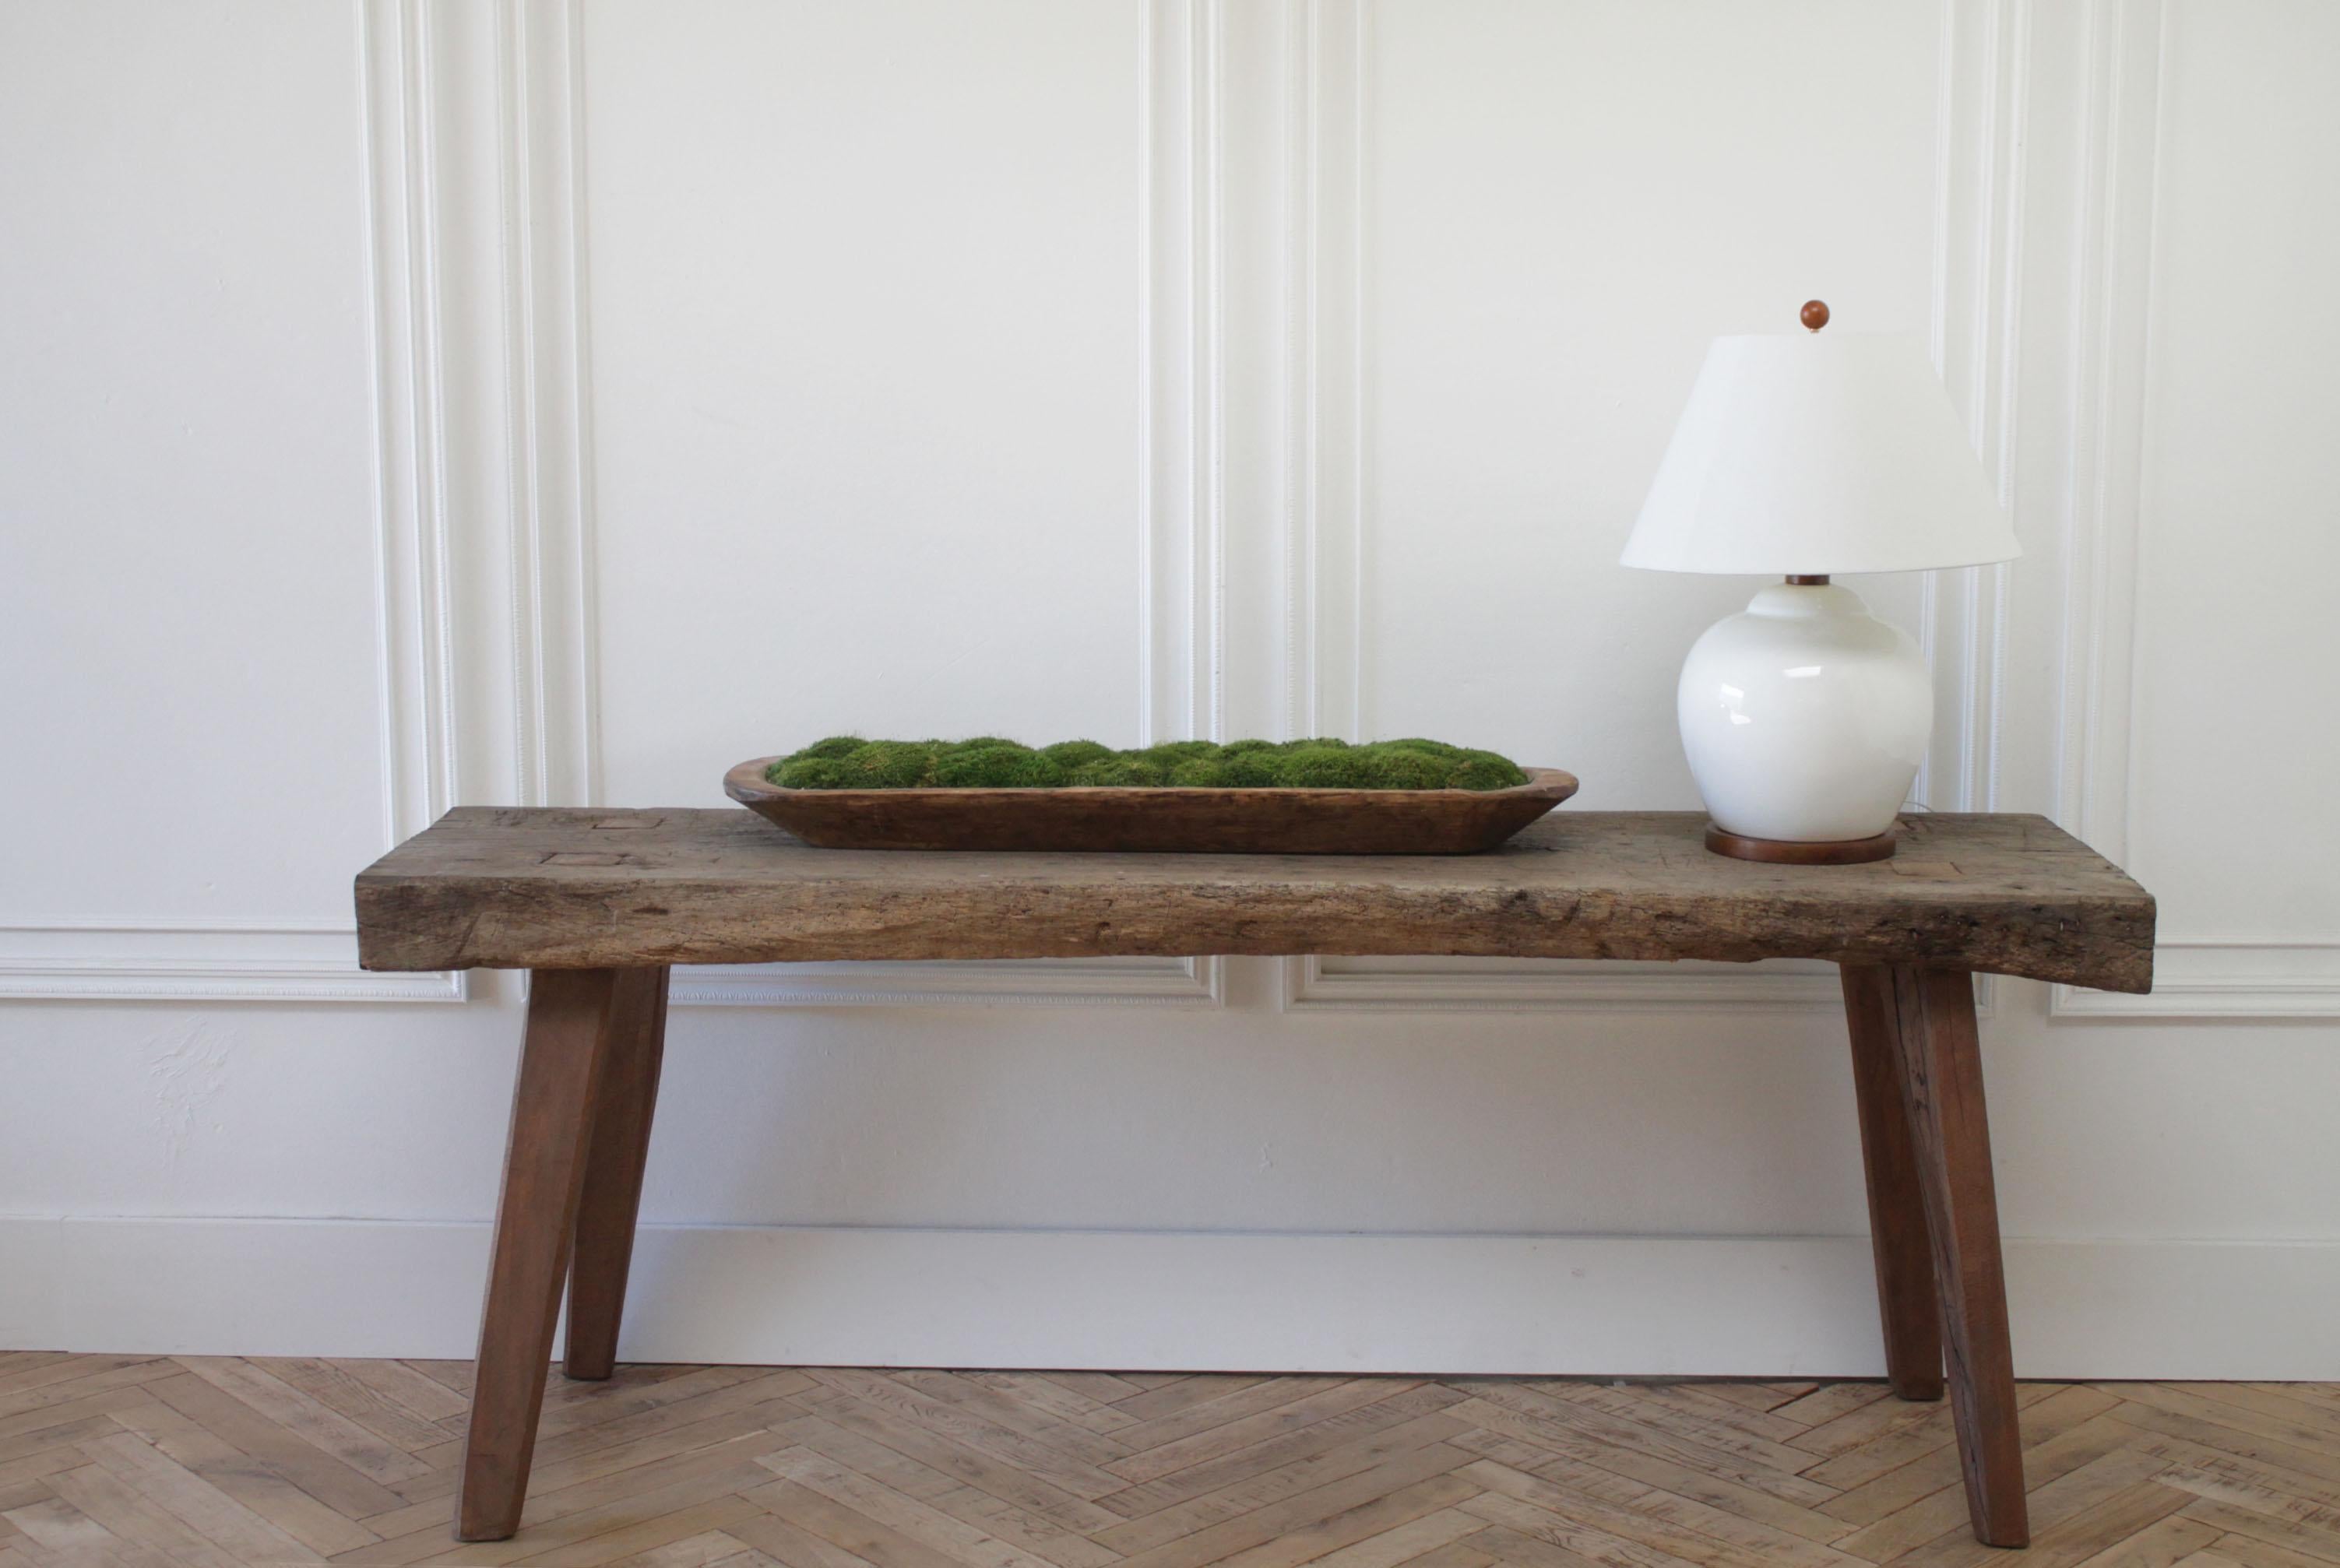 Antique Primitive style wood console table from Belgium
Large wood top, with lots of age and patina. This table is solid and sturdy, ready for everyday use as an entry, a console, or even a sofa table.
Measures: 78